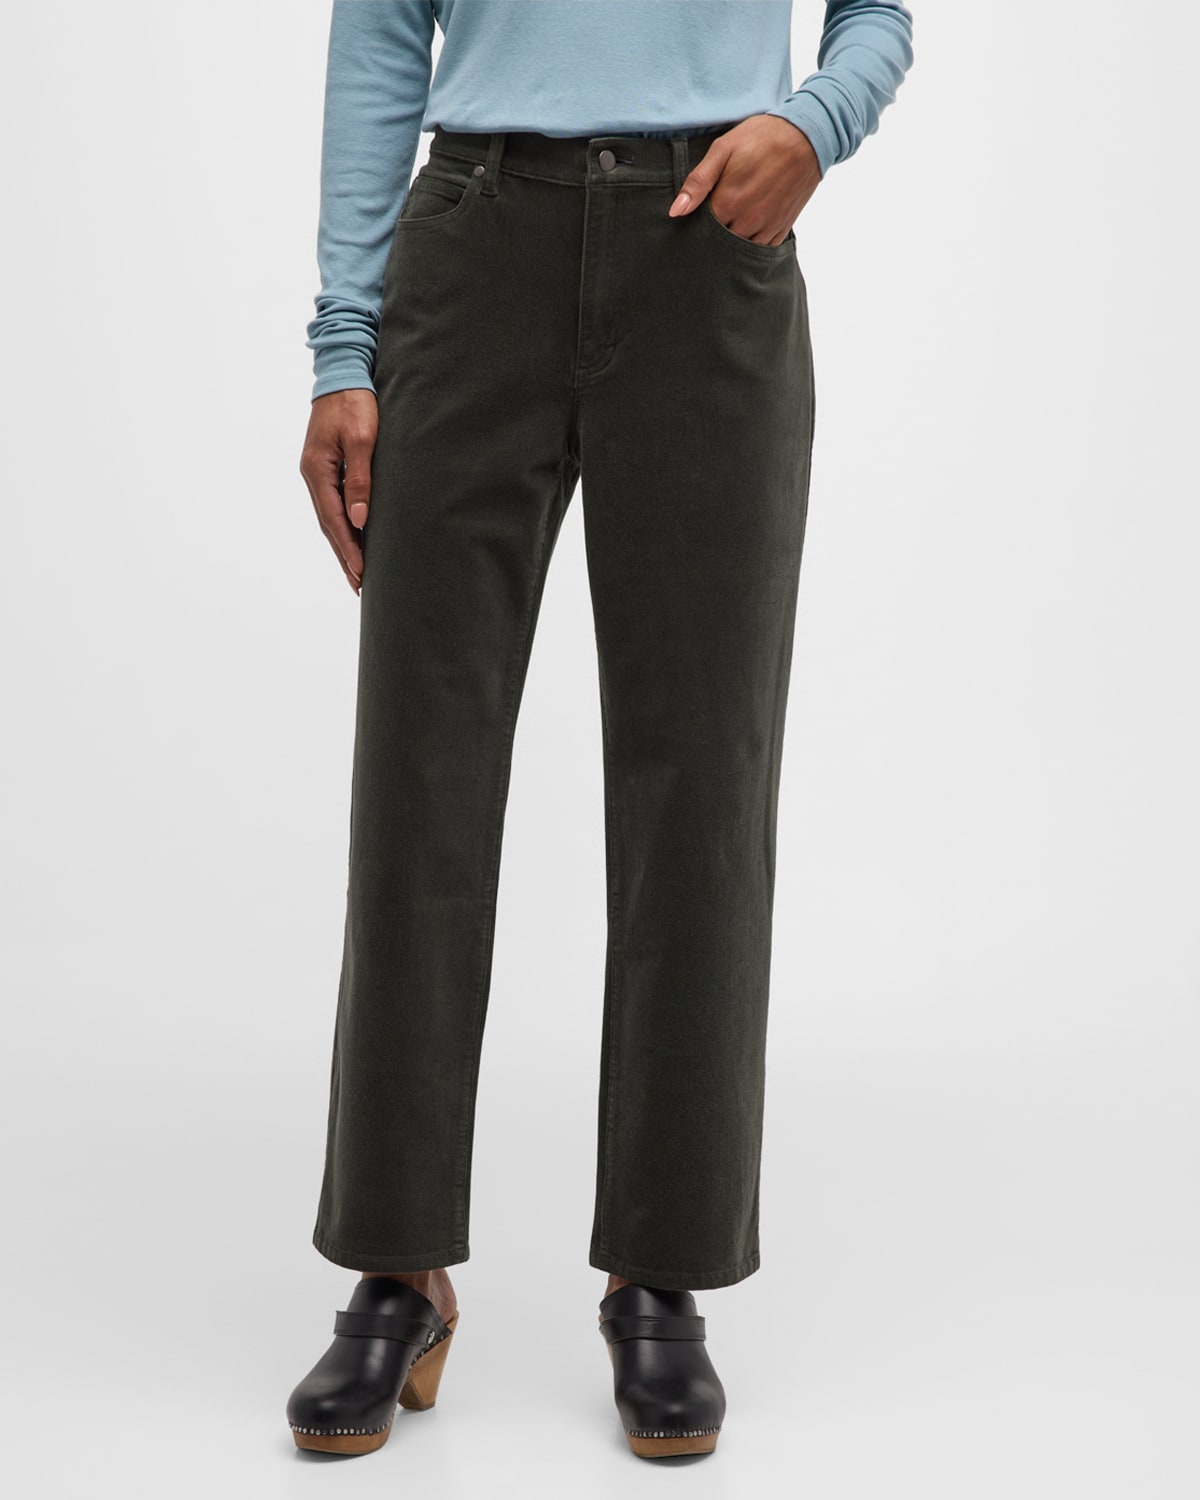 EILEEN FISHER HIGH-RISE CROPPED CORDUROY PANTS